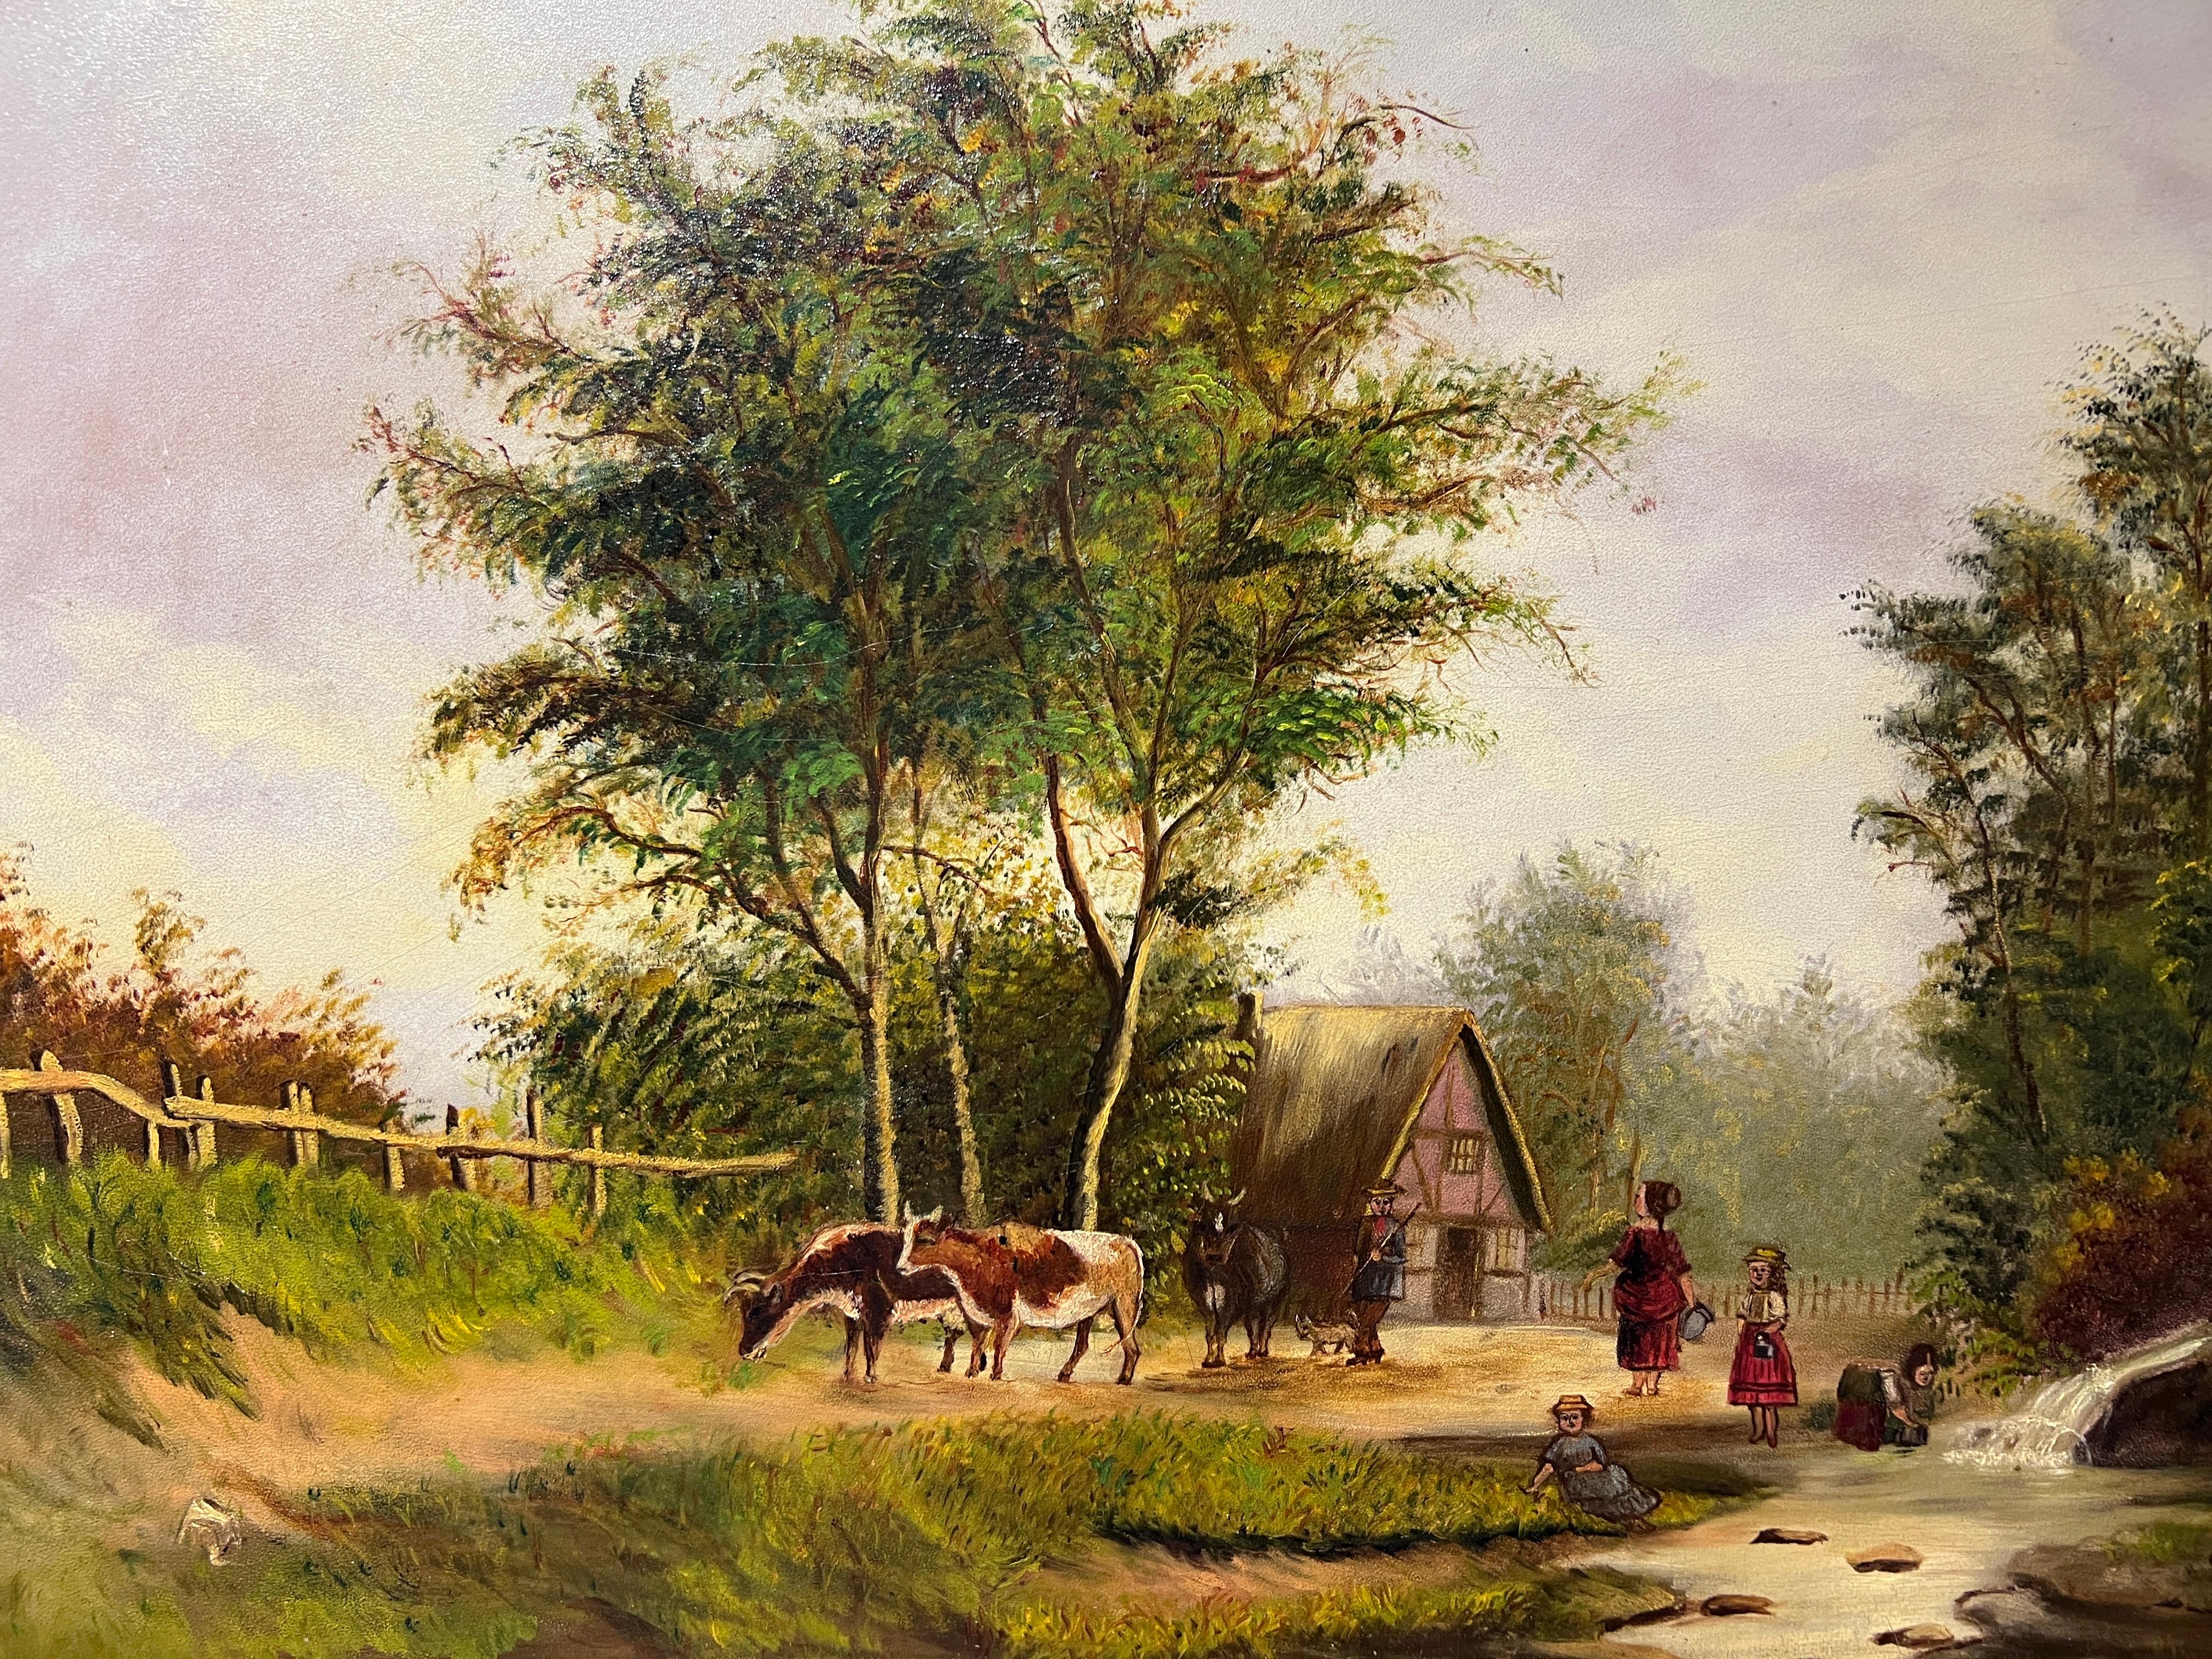 This is an original vintage oil painting on board depicting a country landscape with a cottage, figures on a path with cattle, and children at a brook.

No Visible signature.

Presented in the vintage ornate gold frame. The painting has minor paint